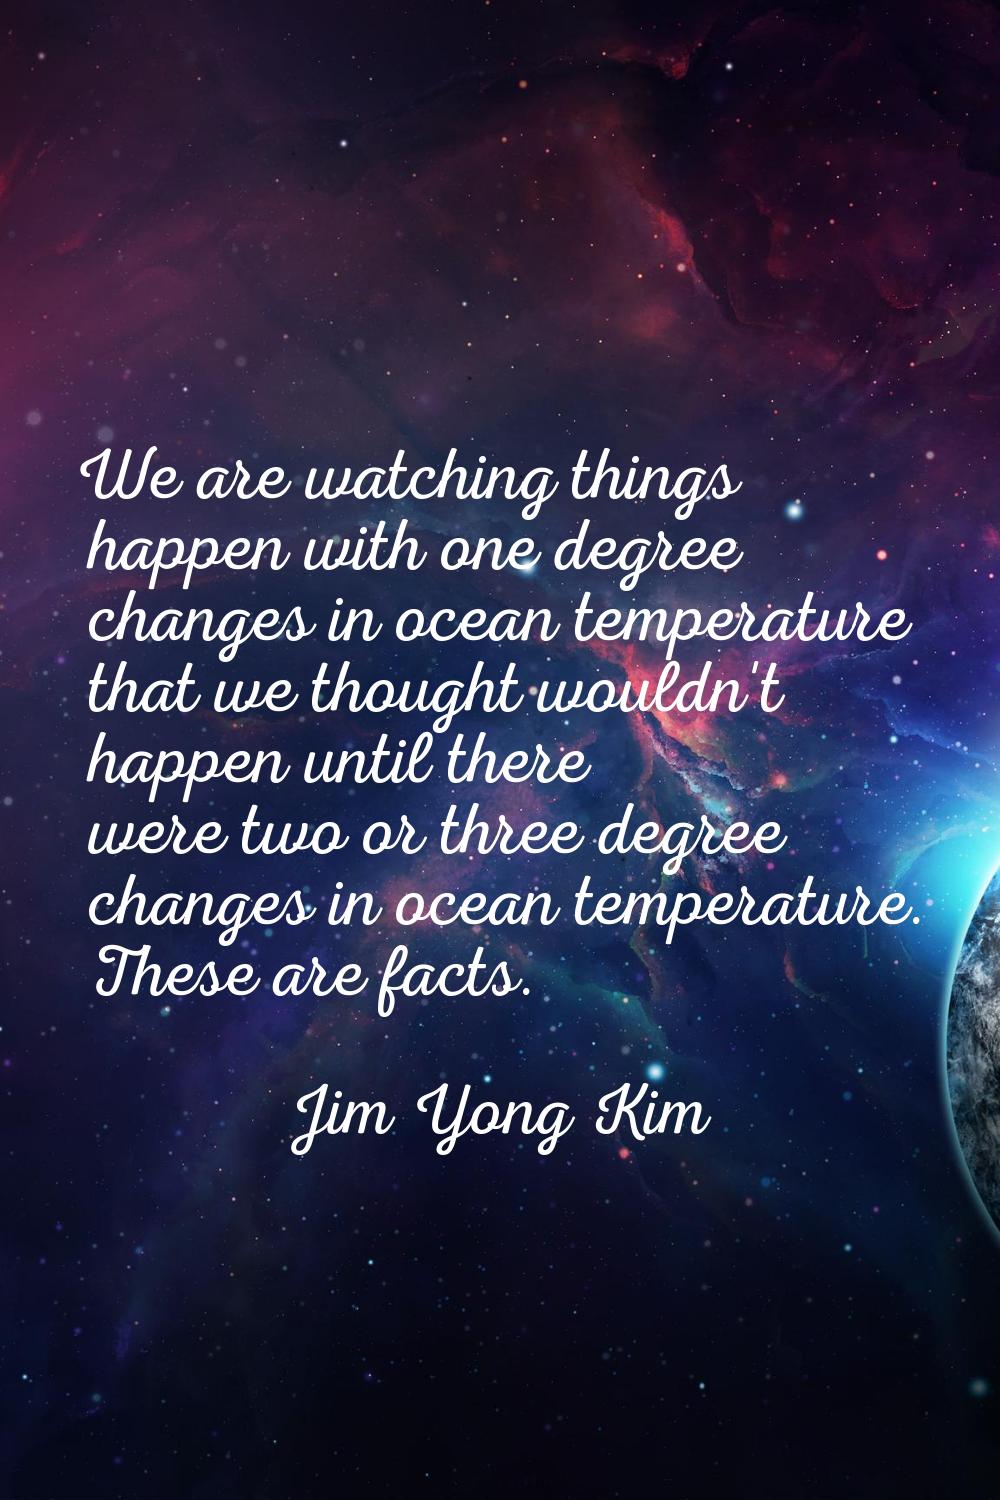 We are watching things happen with one degree changes in ocean temperature that we thought wouldn't